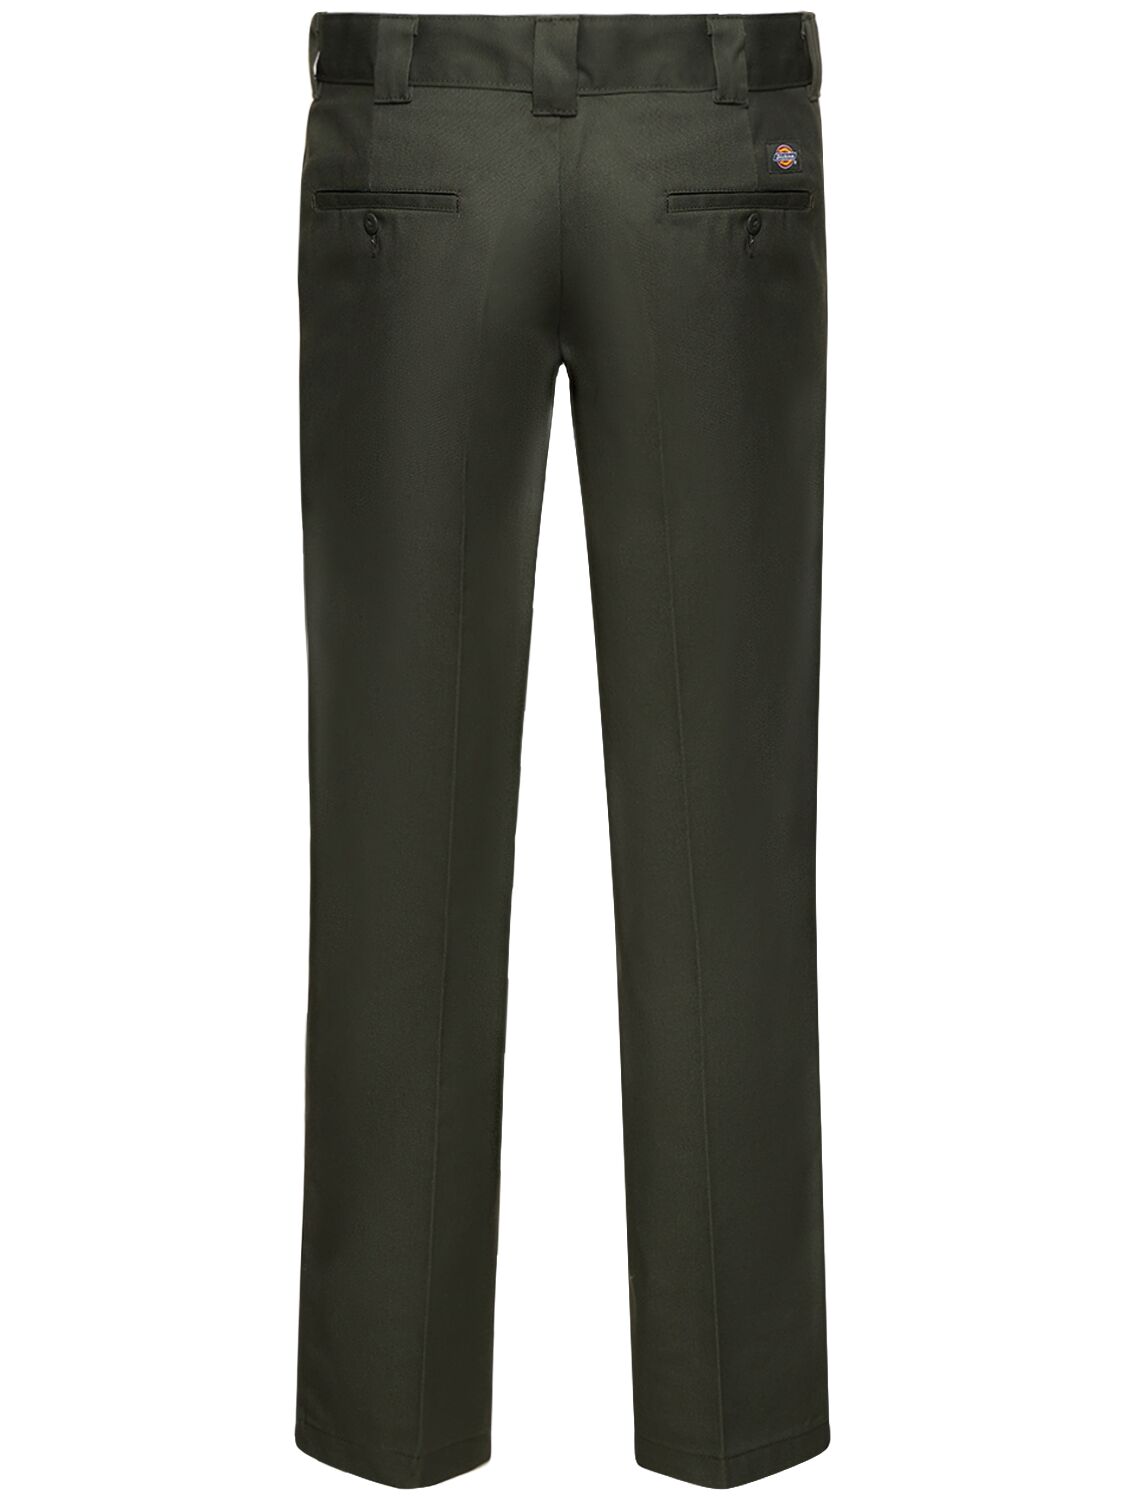 Shop Dickies 873 Slim Straight Fit Twill Work Pants In Olive Green